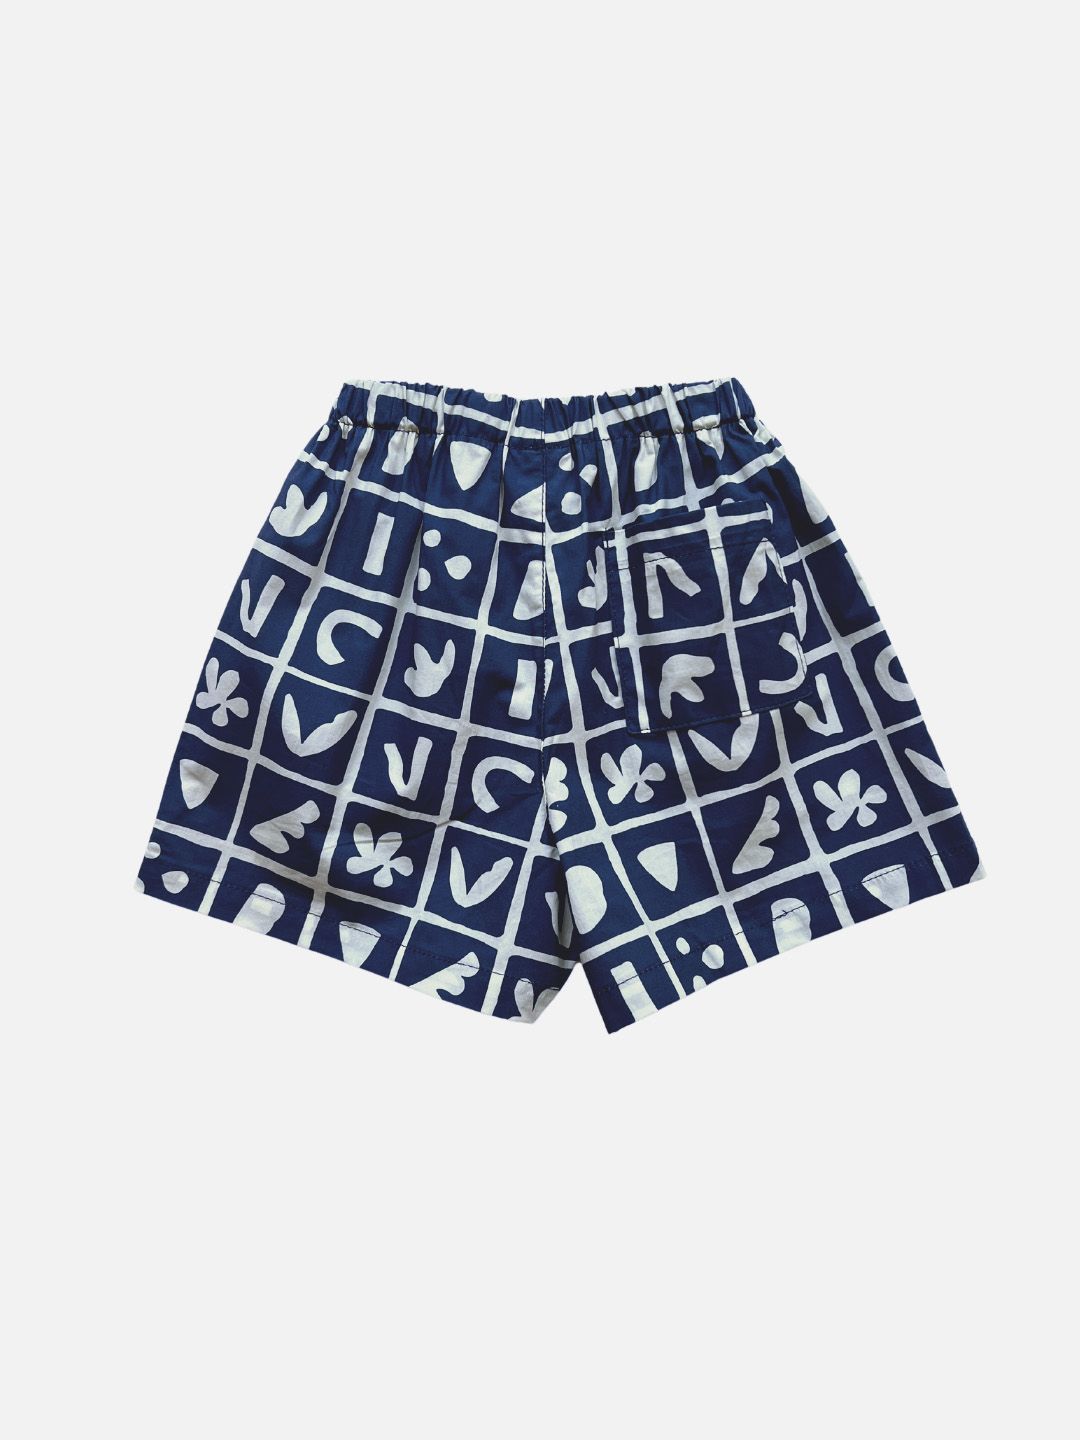 A pair of kids' shorts in deep blue, overlaid with a grid of different shapes in white, with back pocket, rear view